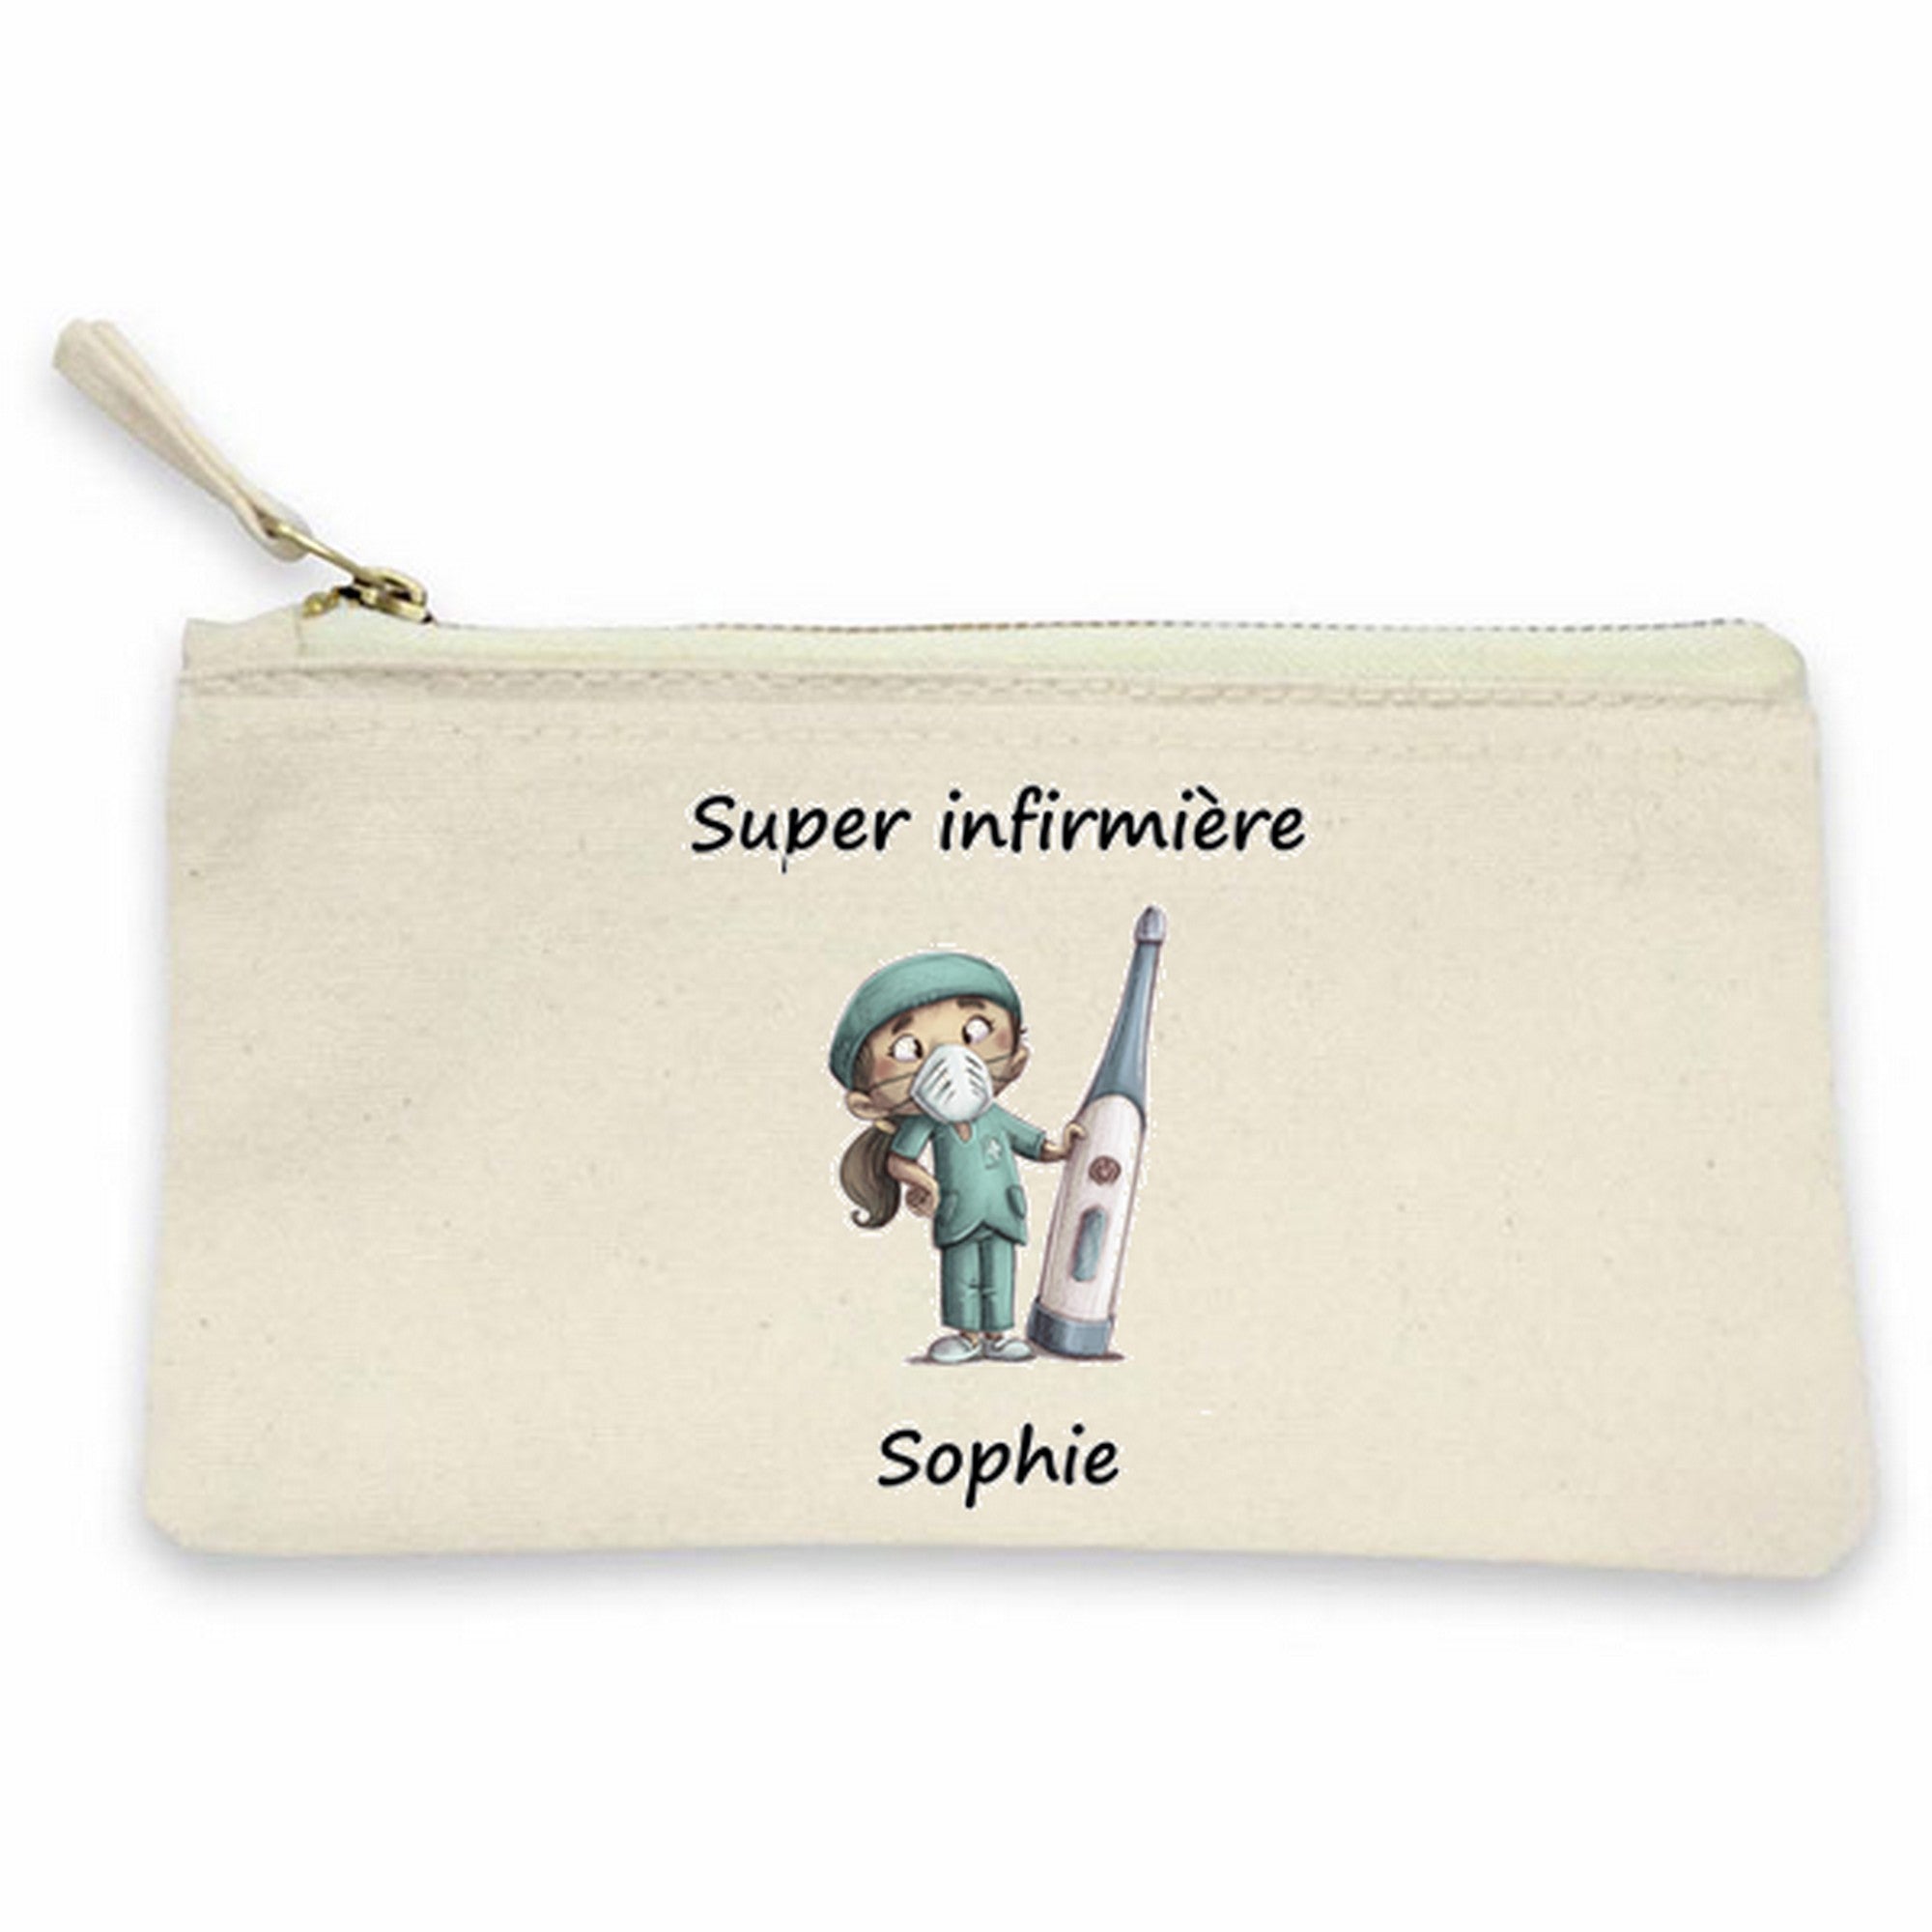 Pochette super infirmiere – Cool and the bag